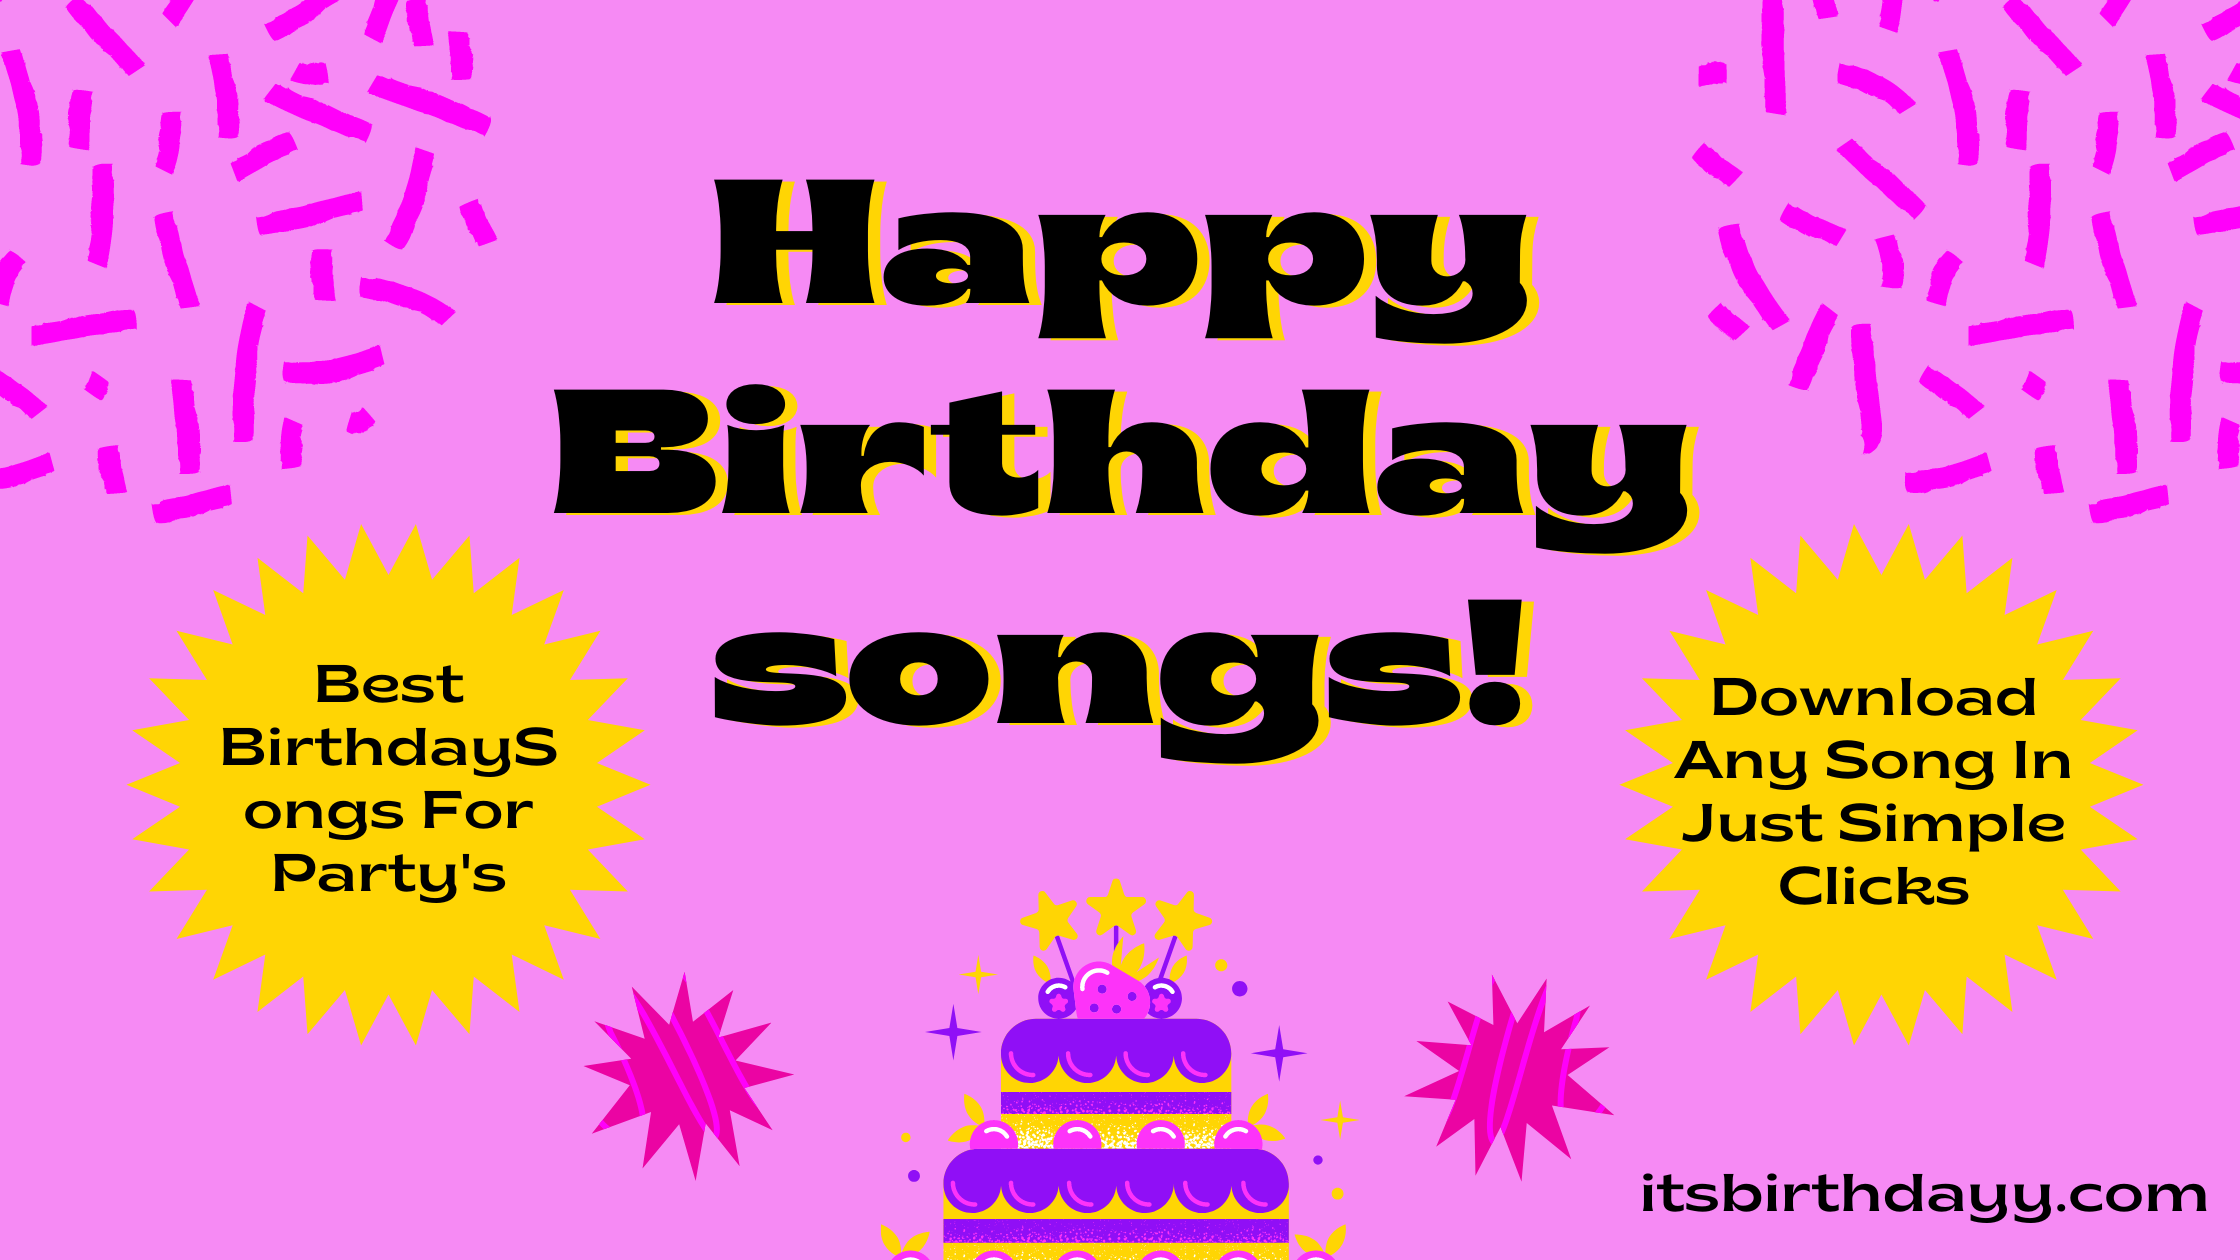 Download Happy Birthday Songs